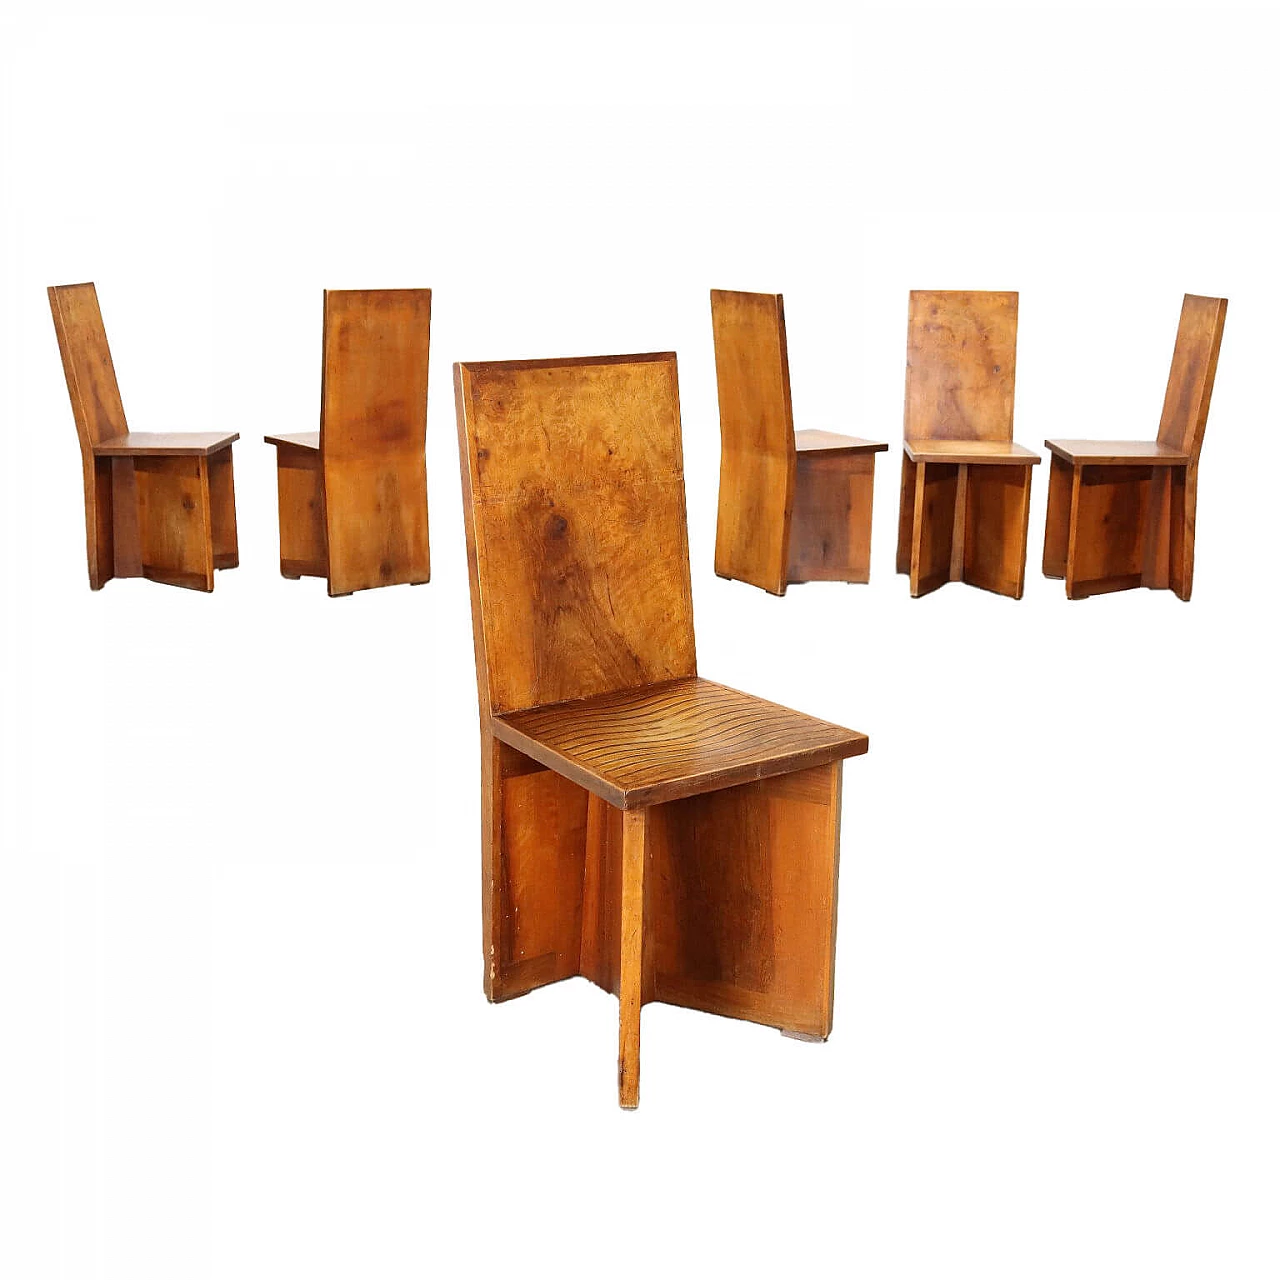 6 Chairs in walnut and burl, 1920s 1